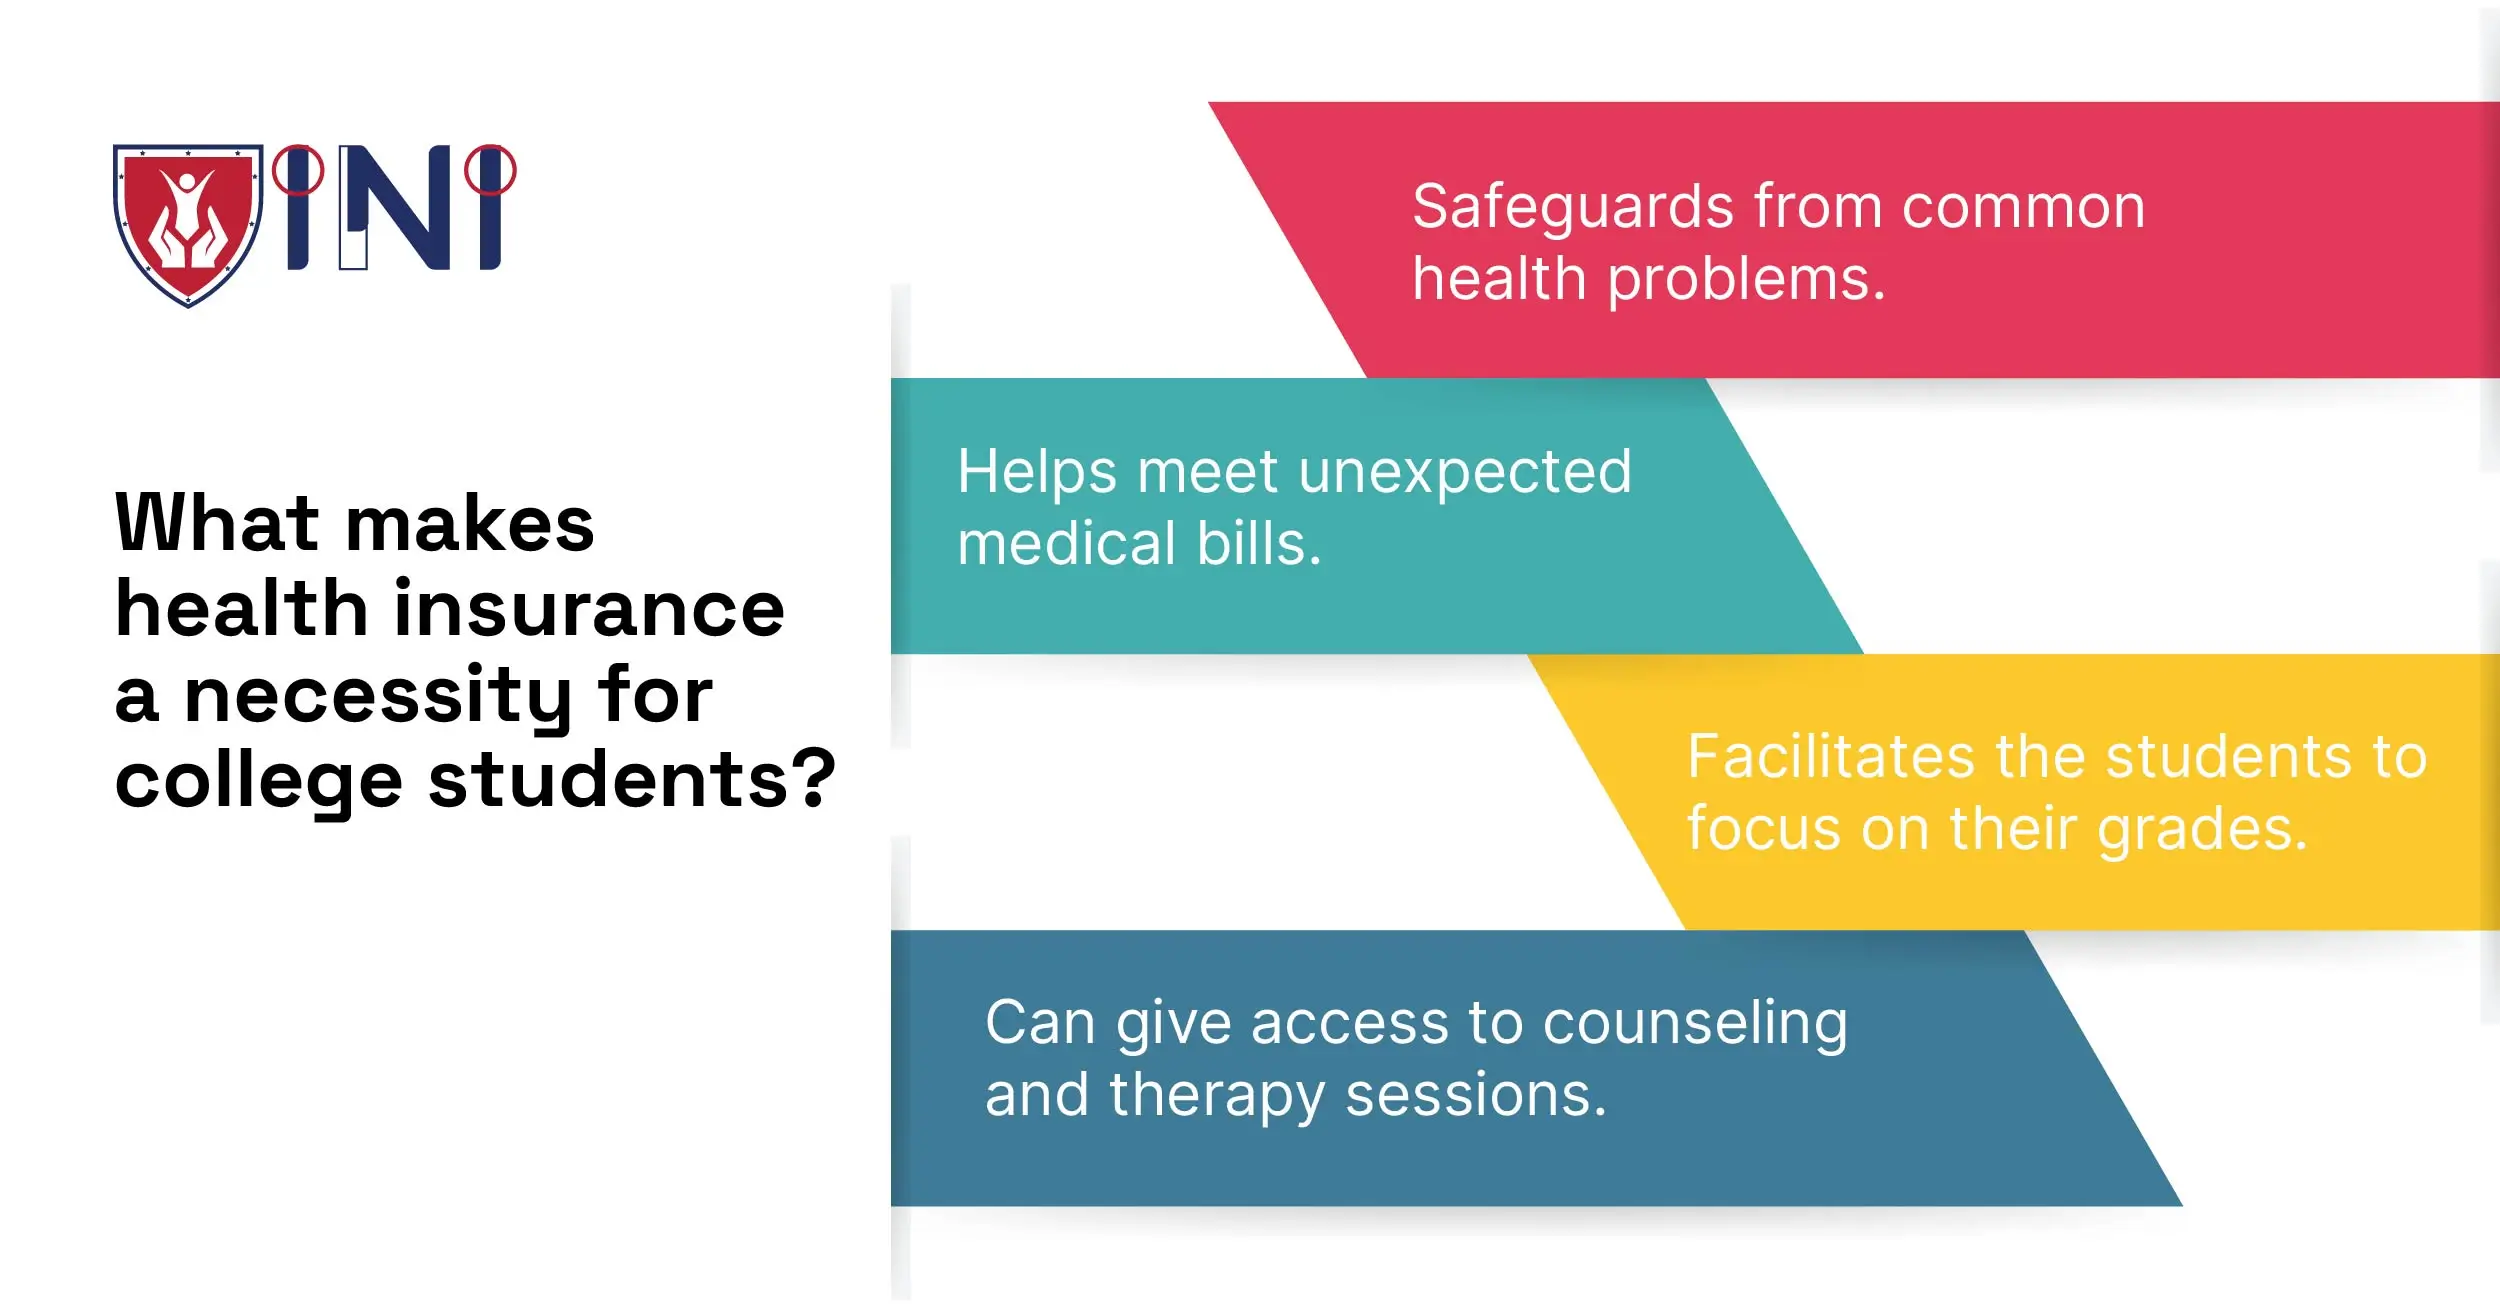 What makes health insurance a must-have?